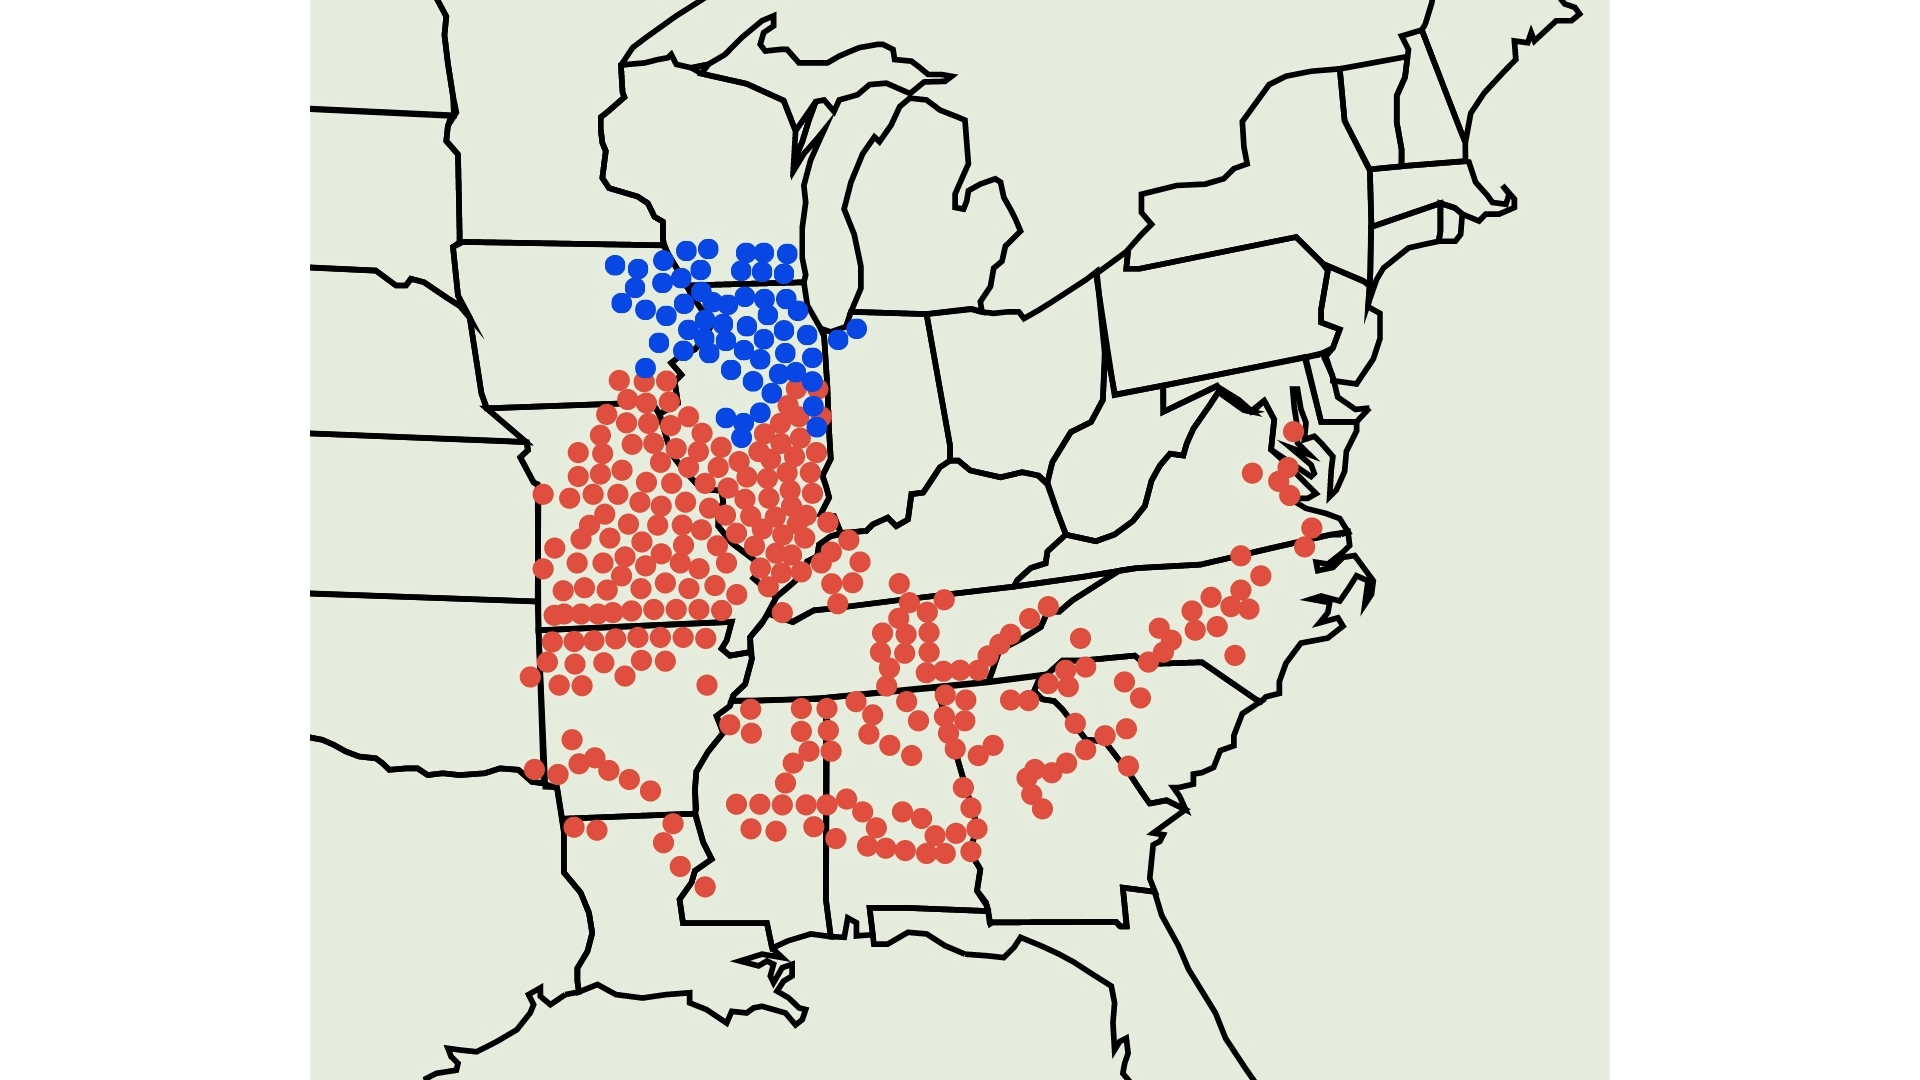 A map using red and blue dots to show locations where the double emergence of 13-year and 17-year periodical cicada broods will occur throughout the Midwest and Southeast United States.